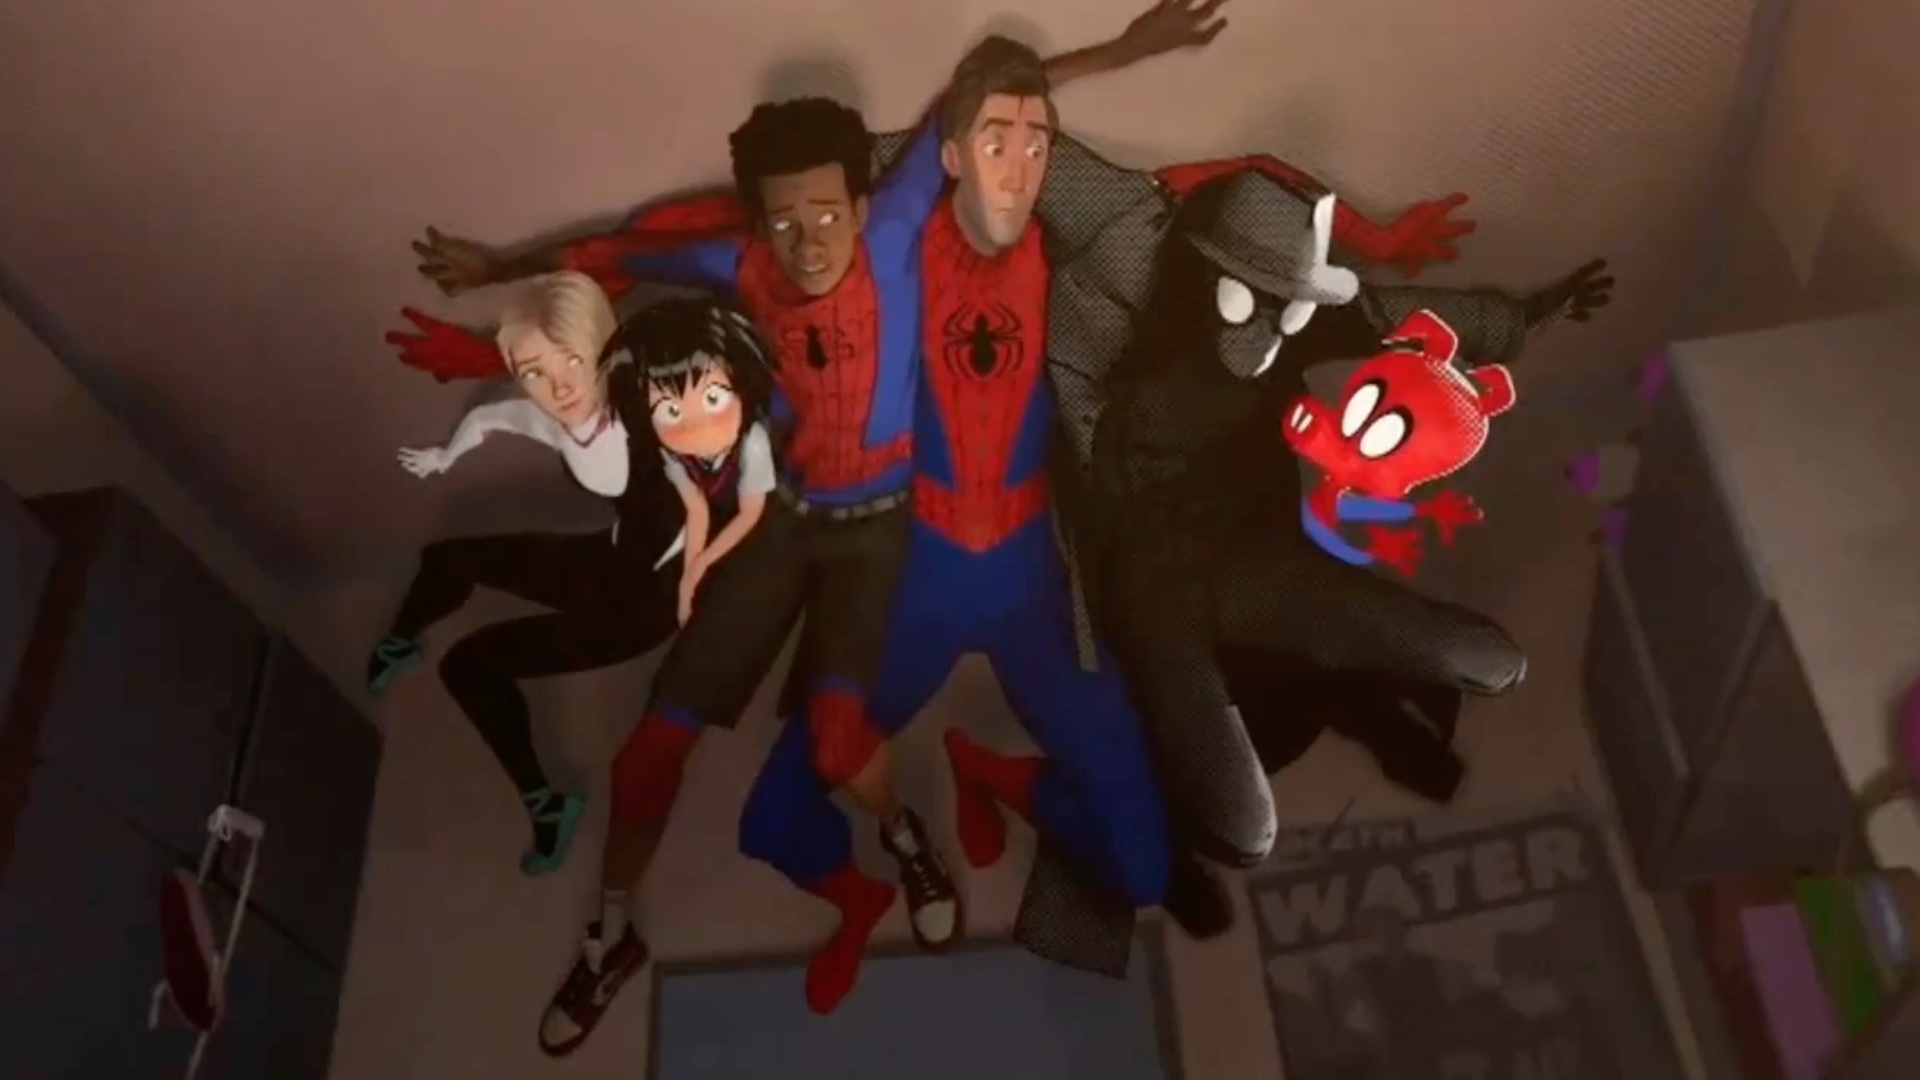 Enjoy Another Great Promo Spot for SPIDER-MAN: INTO THE SPIDER-VERSE